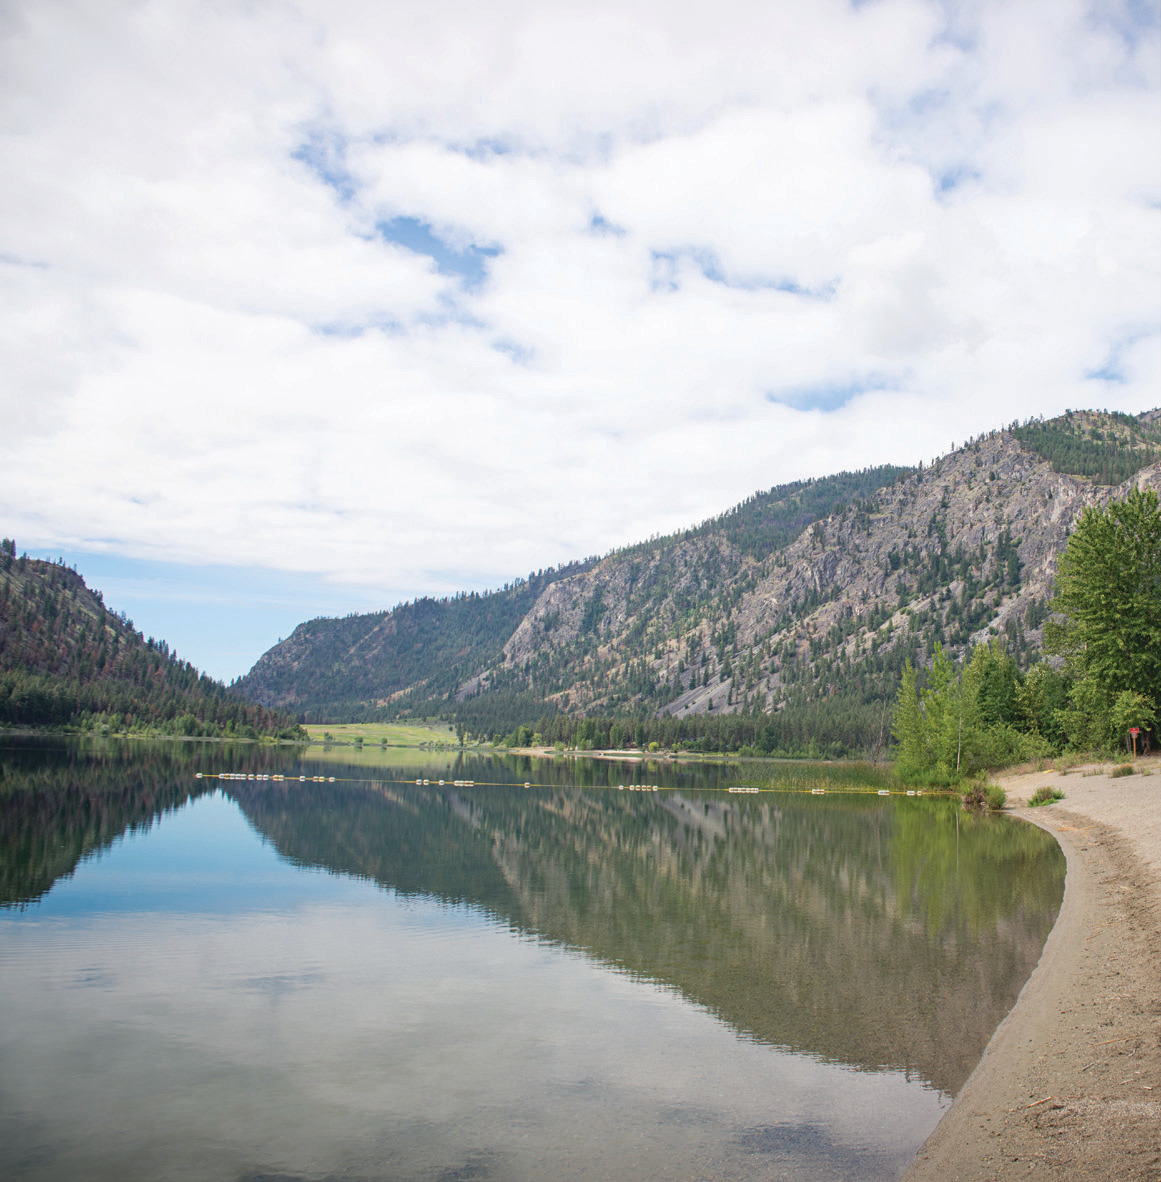 Alta Lake is minutes away from the small city of Pateros.